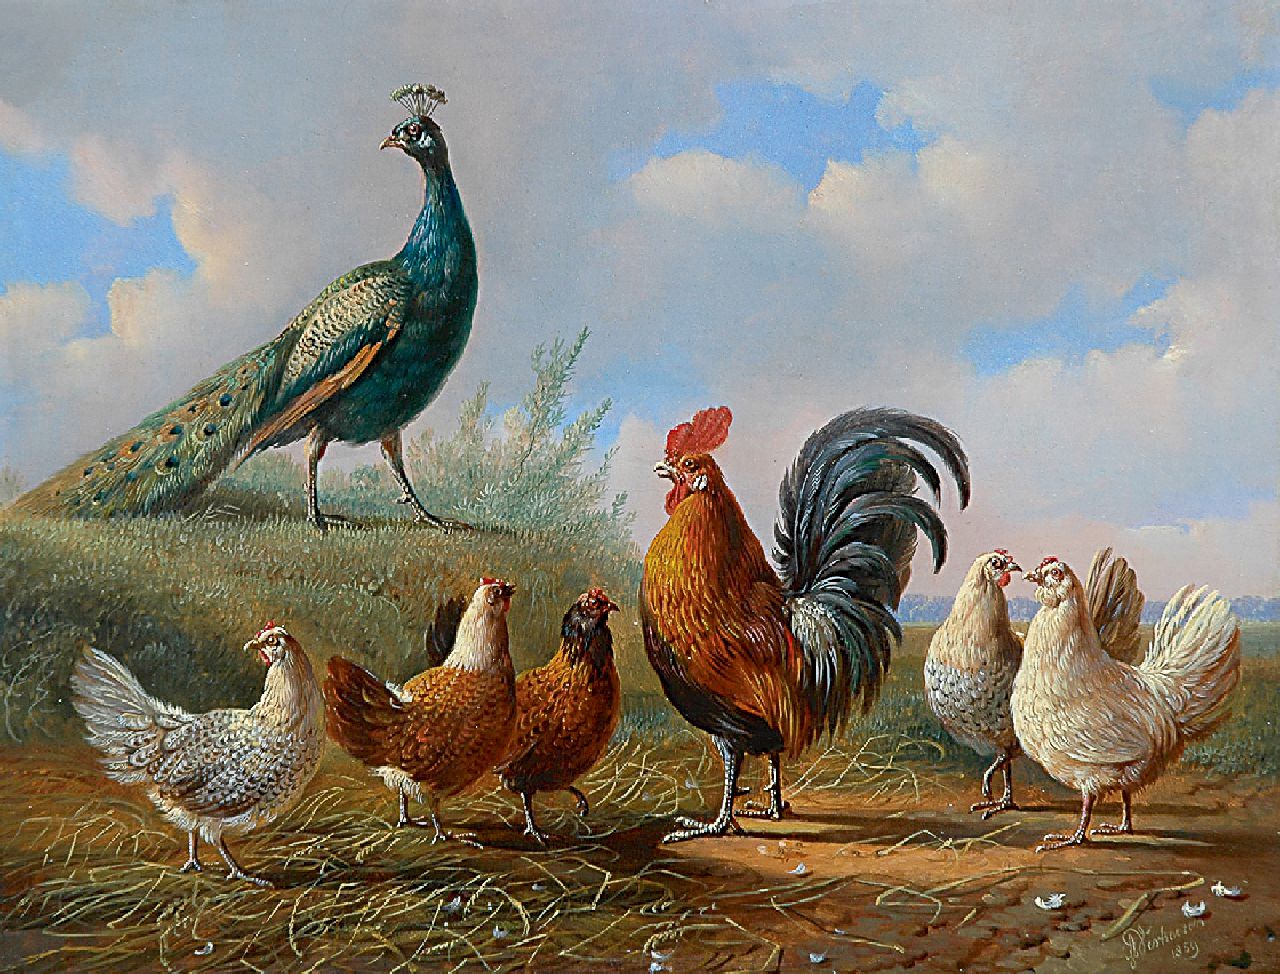 Verhoesen A.  | Albertus Verhoesen, A peacock, a cock and his fowls in a landscape, oil on panel 25.2 x 33.1 cm, signed l.r. and painted 1859